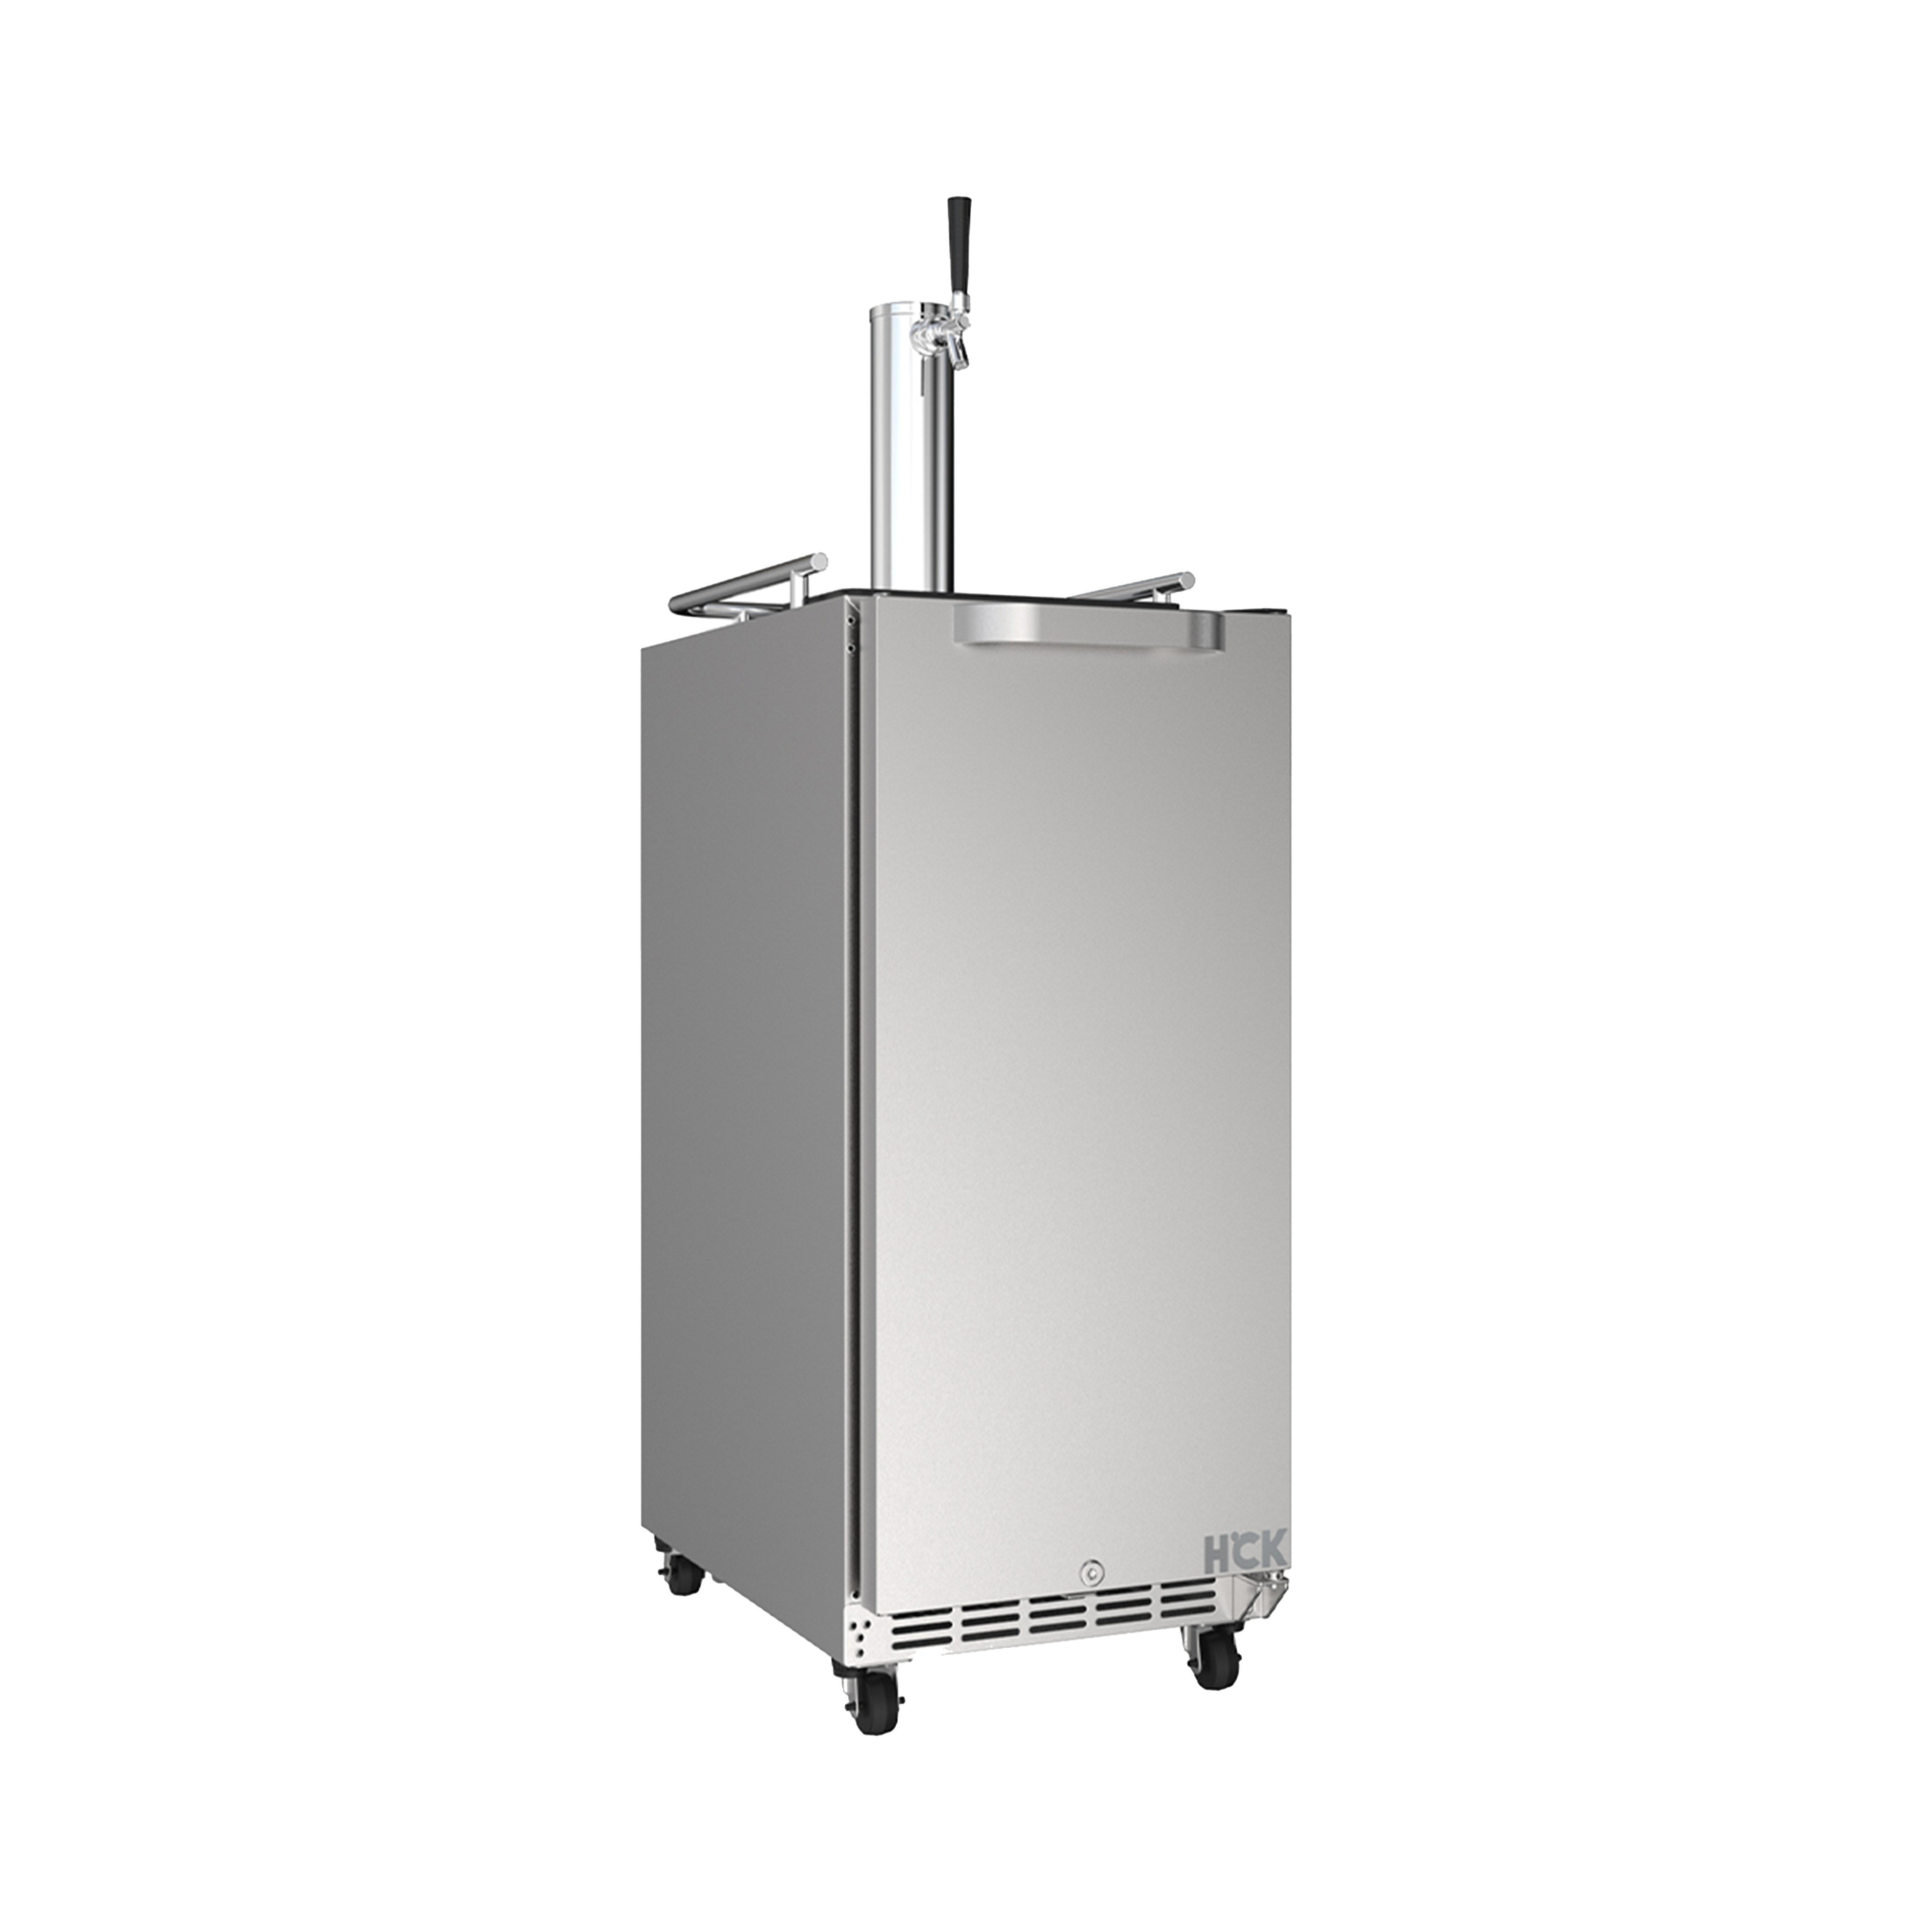 Side view of a 3.2 Cu Ft Outdoor Refrigerator Kegerator 96 cans